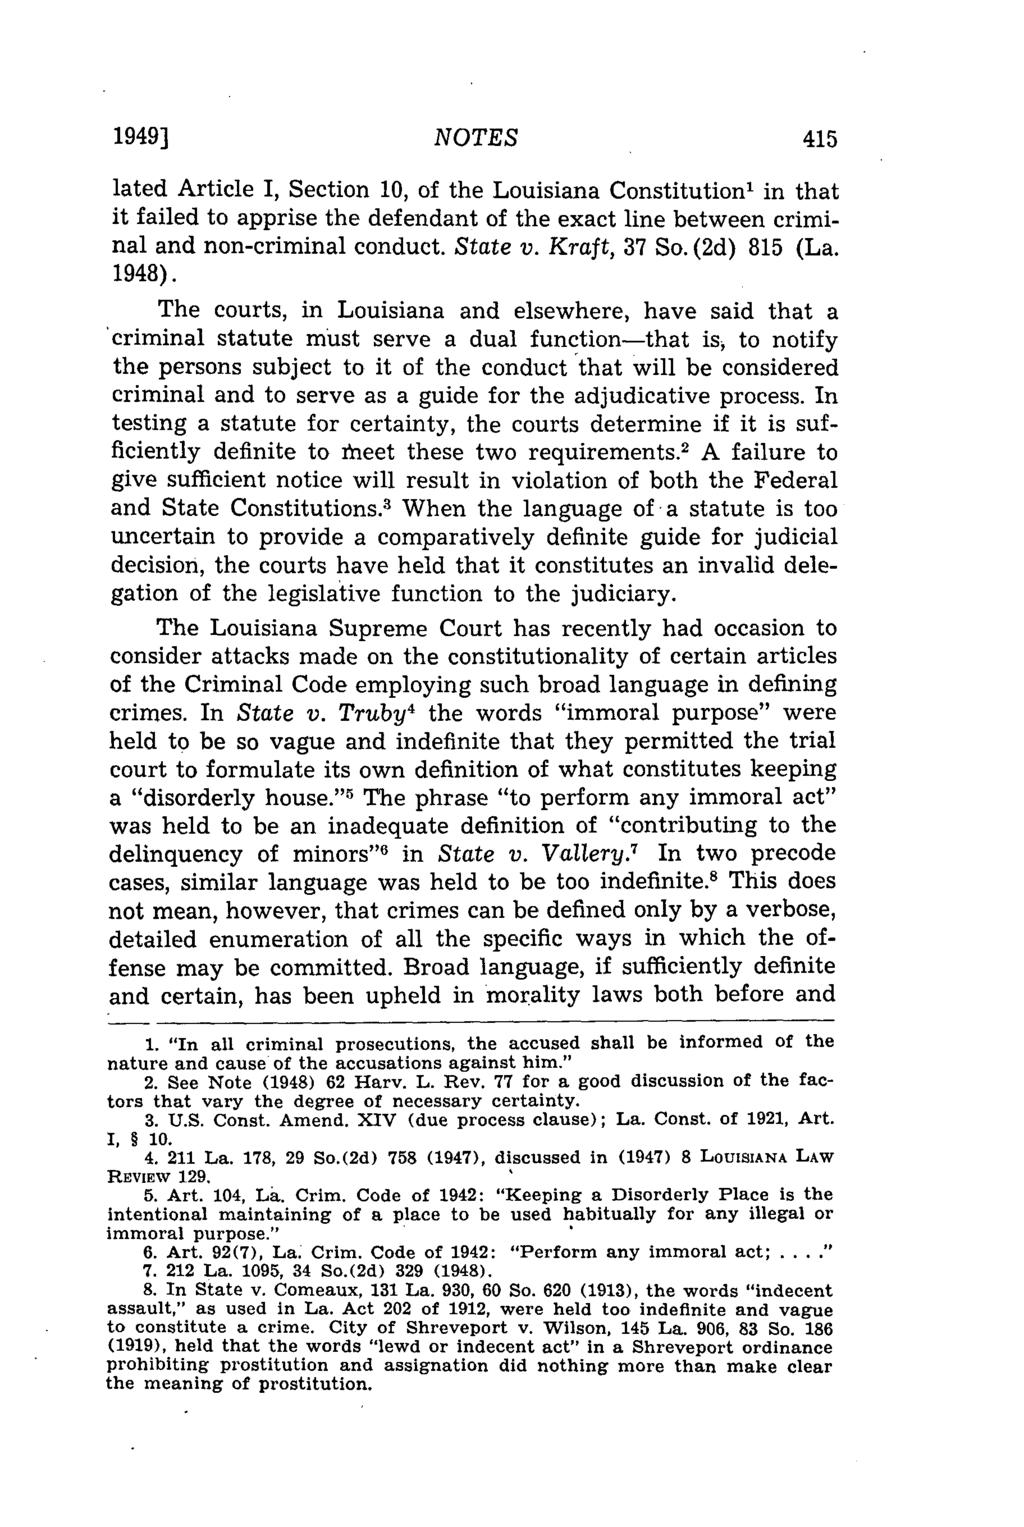 1949] NOTES lated Article I, Section 10, of the Louisiana Constitution' in that it failed to apprise the defendant of the exact line between criminal and non-criminal conduct. State v. Kraft, 37 So.